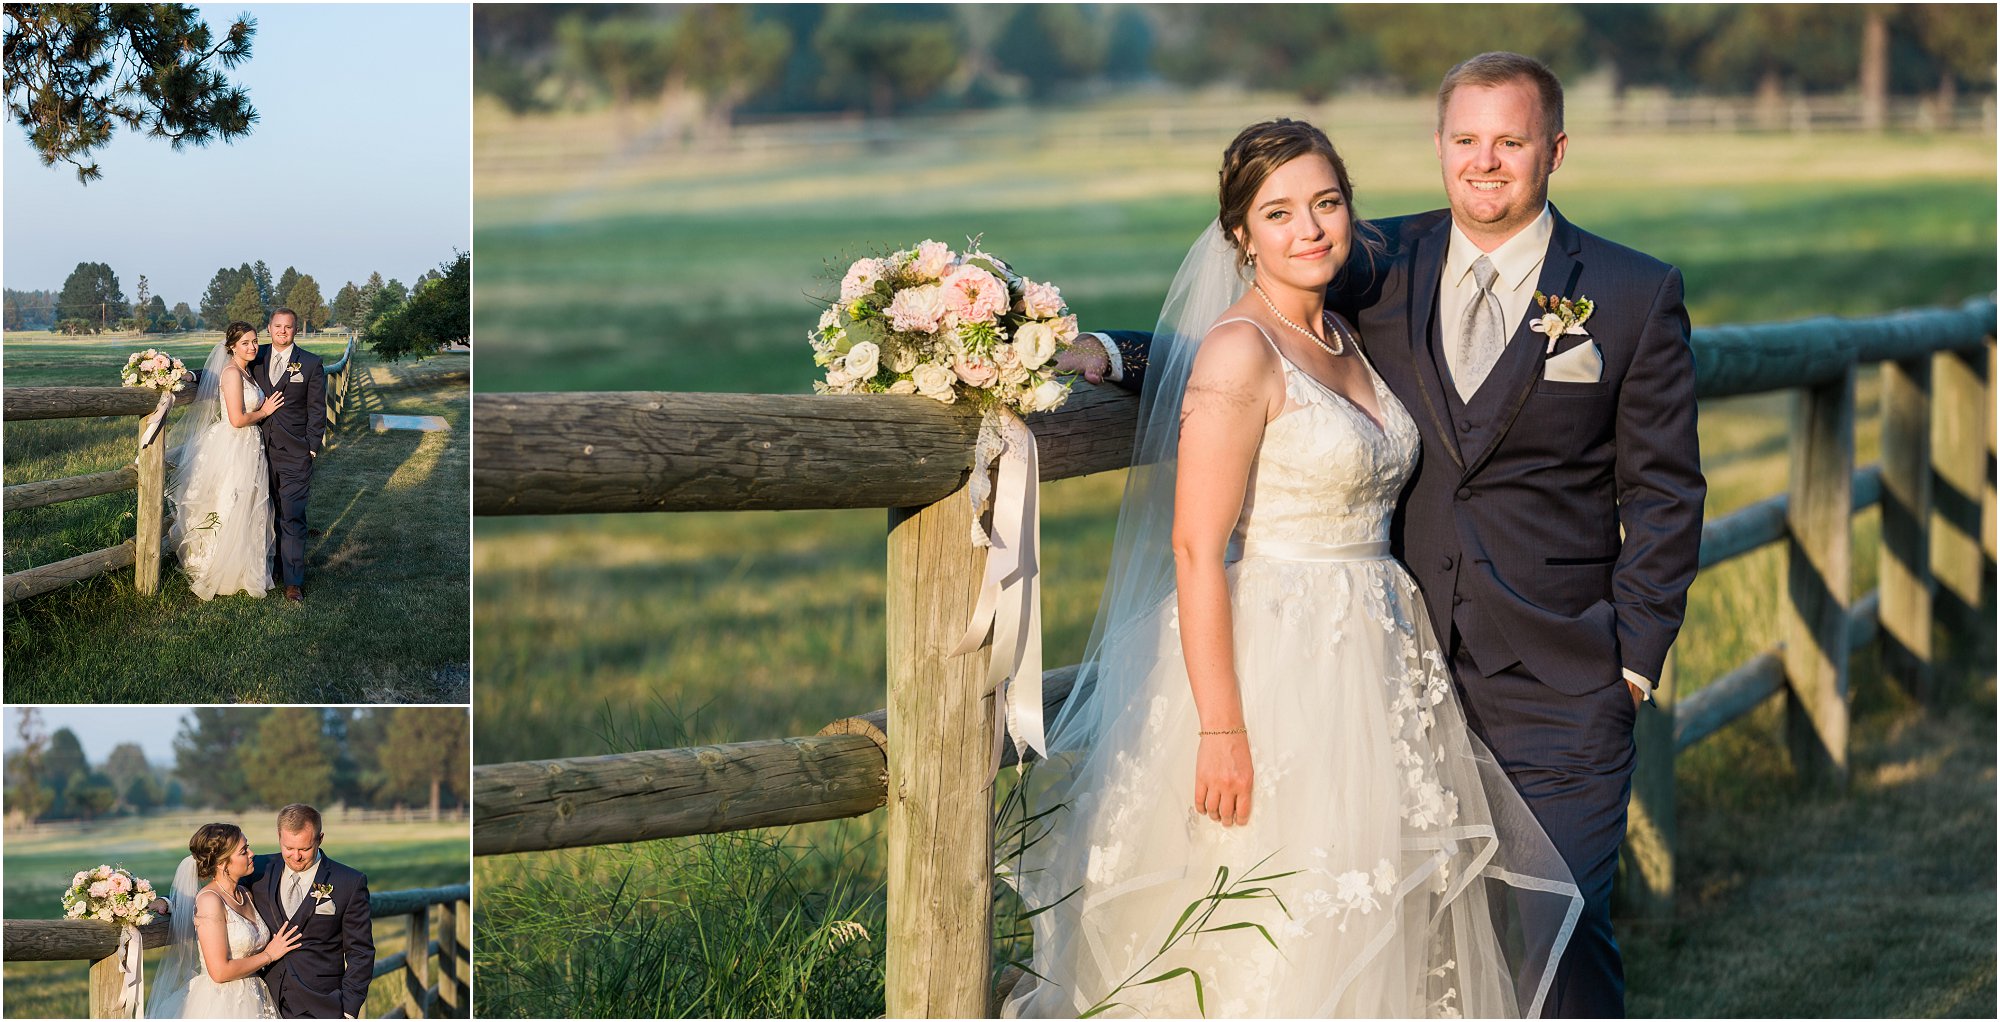 The beautiful lush green grass at the Rock Springs Ranch wedding venue is absolutely stunning during the golden hour for couple's wedding portraits. Captured by Bend wedding photographer Erica Swantek Photography. 